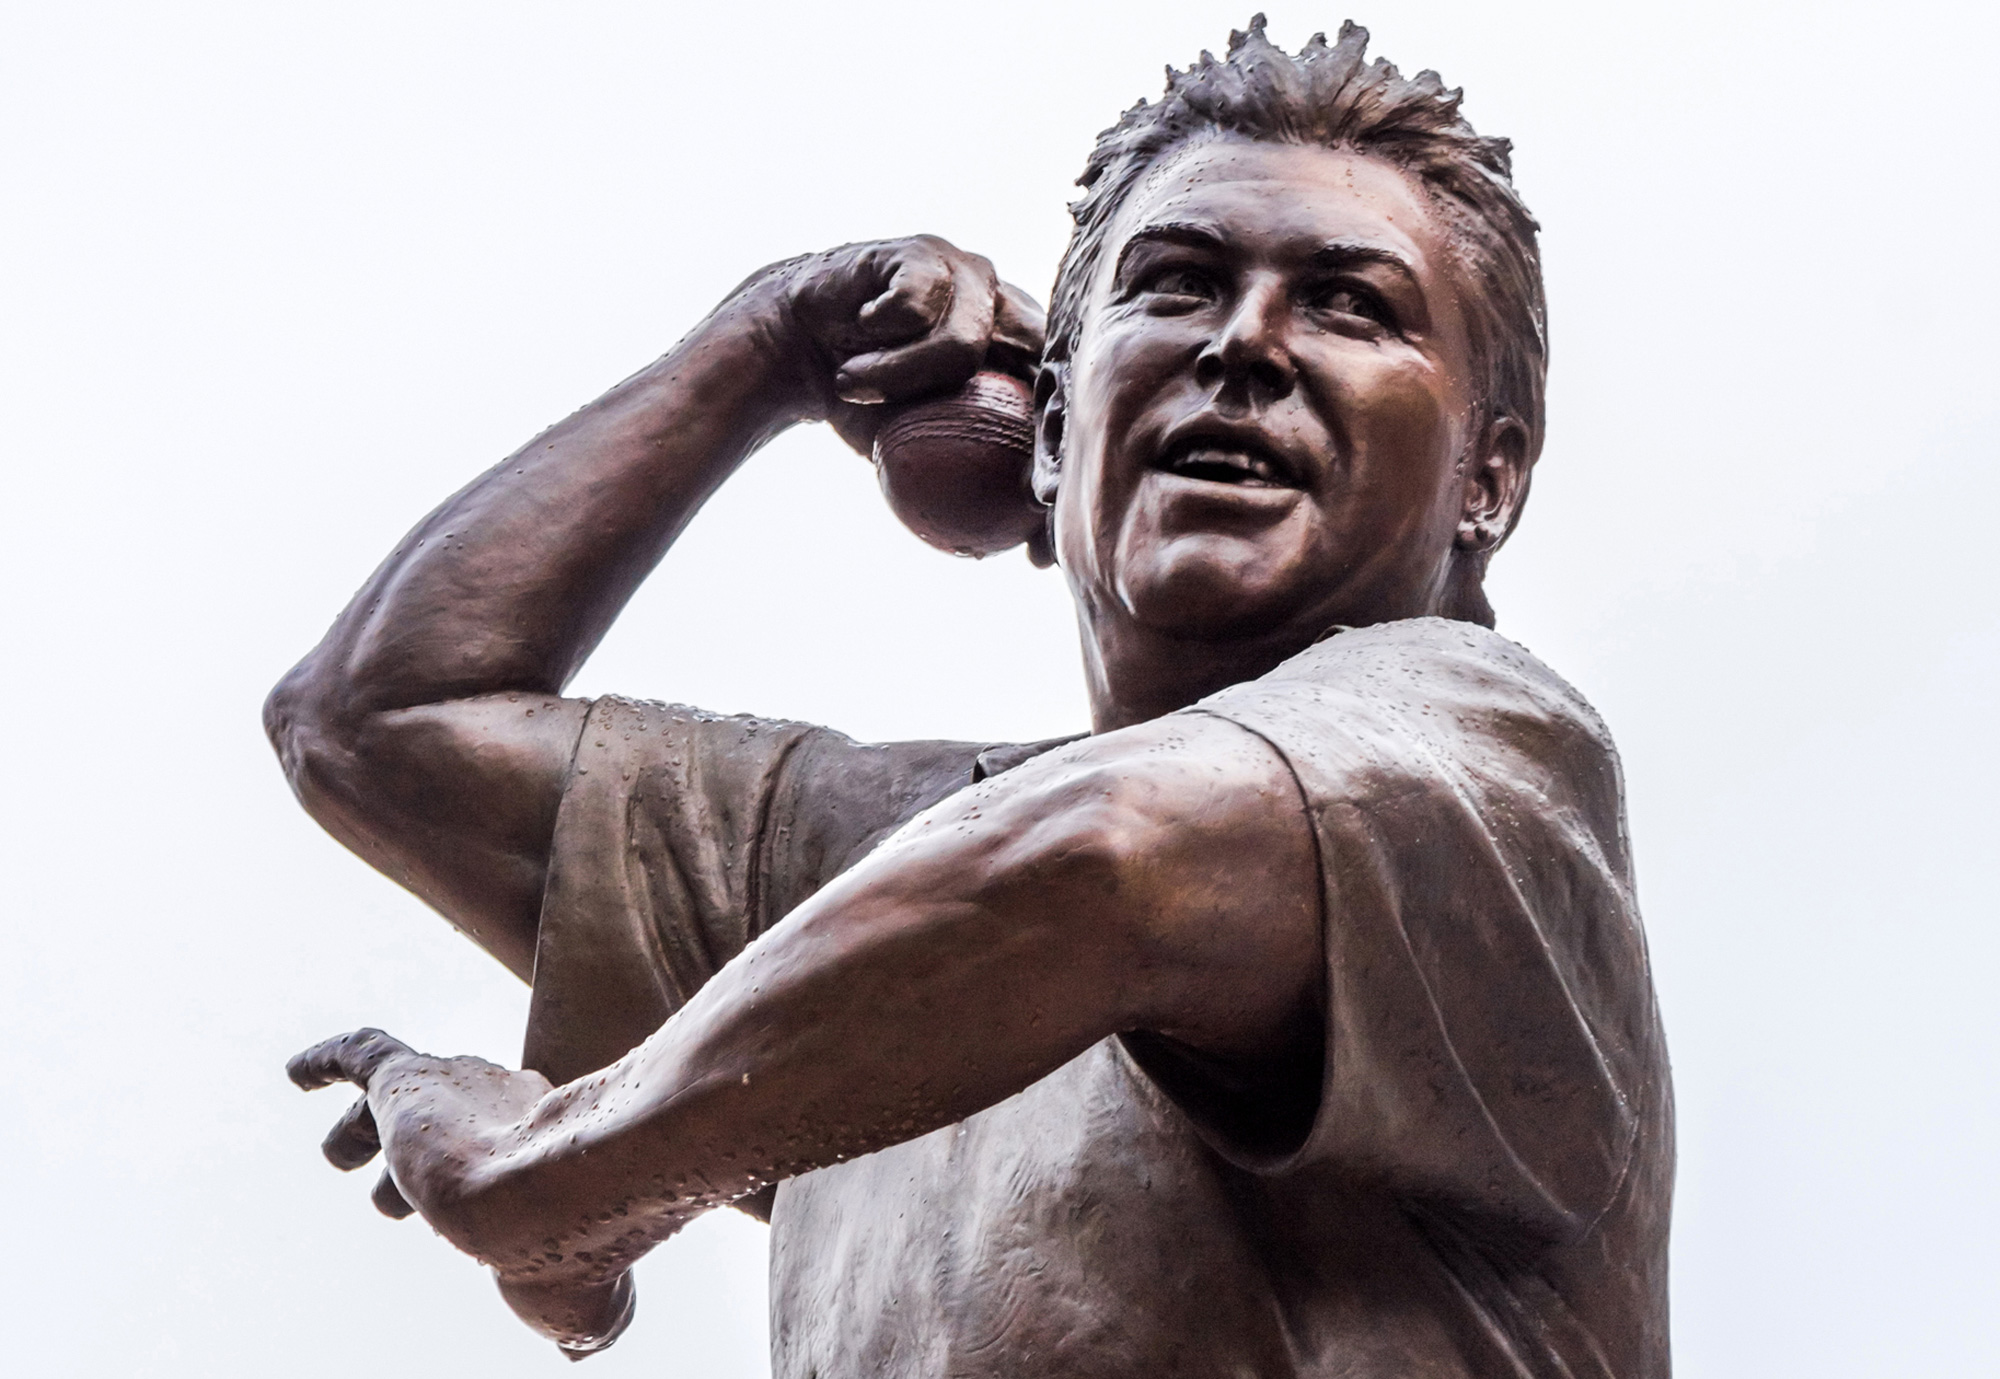 The statue of Shane Warne at Melbourne Cricket Ground in Australia